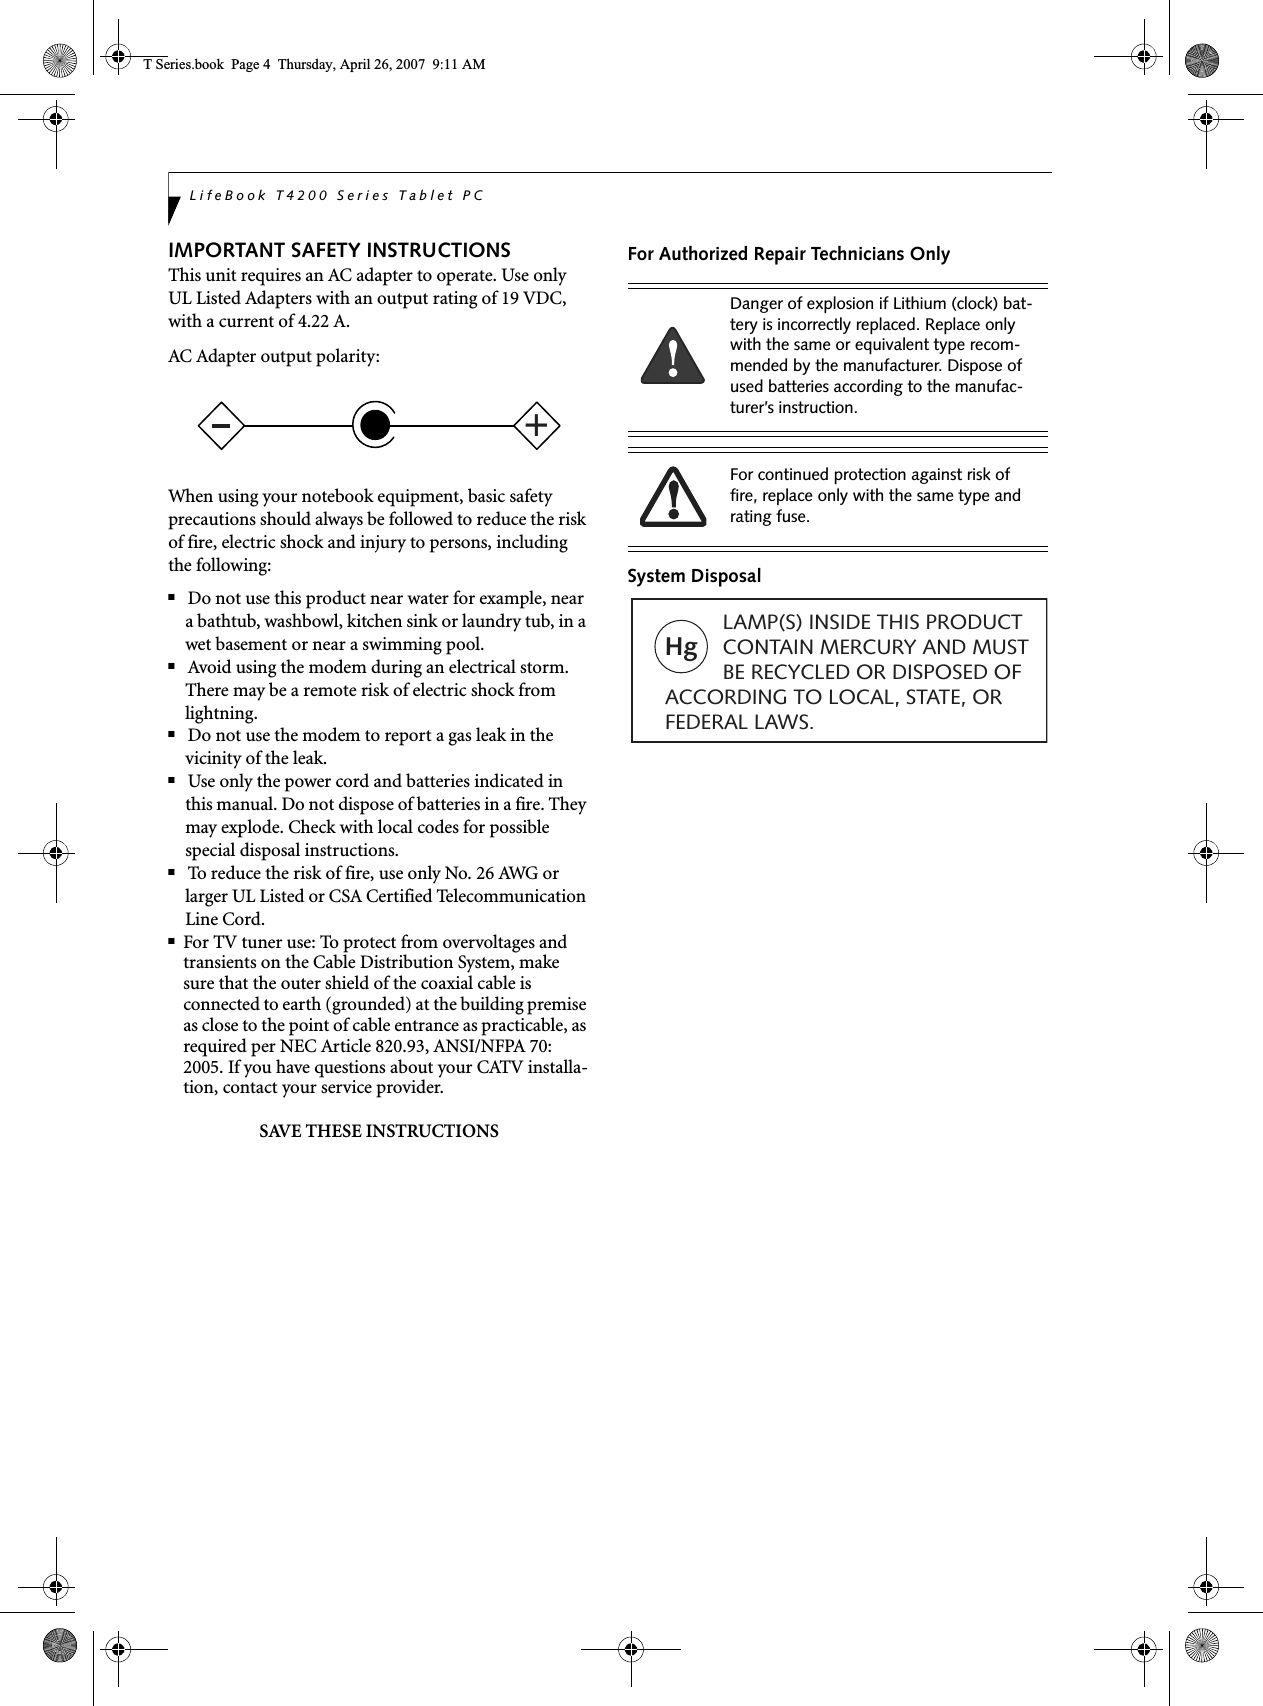 LifeBook T4200 Series Tablet PCIMPORTANT SAFETY INSTRUCTIONS This unit requires an AC adapter to operate. Use only UL Listed Adapters with an output rating of 19 VDC, with a current of 4.22 A.AC Adapter output polarity:When using your notebook equipment, basic safety precautions should always be followed to reduce the risk of fire, electric shock and injury to persons, including the following:■Do not use this product near water for example, near a bathtub, washbowl, kitchen sink or laundry tub, in a wet basement or near a swimming pool.■Avoid using the modem during an electrical storm. There may be a remote risk of electric shock from lightning.■Do not use the modem to report a gas leak in the vicinity of the leak.■Use only the power cord and batteries indicated in this manual. Do not dispose of batteries in a fire. They may explode. Check with local codes for possible special disposal instructions.■To reduce the risk of fire, use only No. 26 AWG or larger UL Listed or CSA Certified Telecommunication Line Cord.■For TV tuner use: To protect from overvoltages and transients on the Cable Distribution System, make sure that the outer shield of the coaxial cable is connected to earth (grounded) at the building premise as close to the point of cable entrance as practicable, as required per NEC Article 820.93, ANSI/NFPA 70: 2005. If you have questions about your CATV installa-tion, contact your service provider.SAVE THESE INSTRUCTIONSFor Authorized Repair Technicians OnlySystem Disposal+Danger of explosion if Lithium (clock) bat-tery is incorrectly replaced. Replace only with the same or equivalent type recom-mended by the manufacturer. Dispose of used batteries according to the manufac-turer’s instruction.For continued protection against risk of fire, replace only with the same type and rating fuse.Hg          LAMP(S) INSIDE THIS PRODUCT            CONTAIN MERCURY AND MUST          BE RECYCLED OR DISPOSED OF ACCORDING TO LOCAL, STATE, ORFEDERAL LAWS.T Series.book  Page 4  Thursday, April 26, 2007  9:11 AM